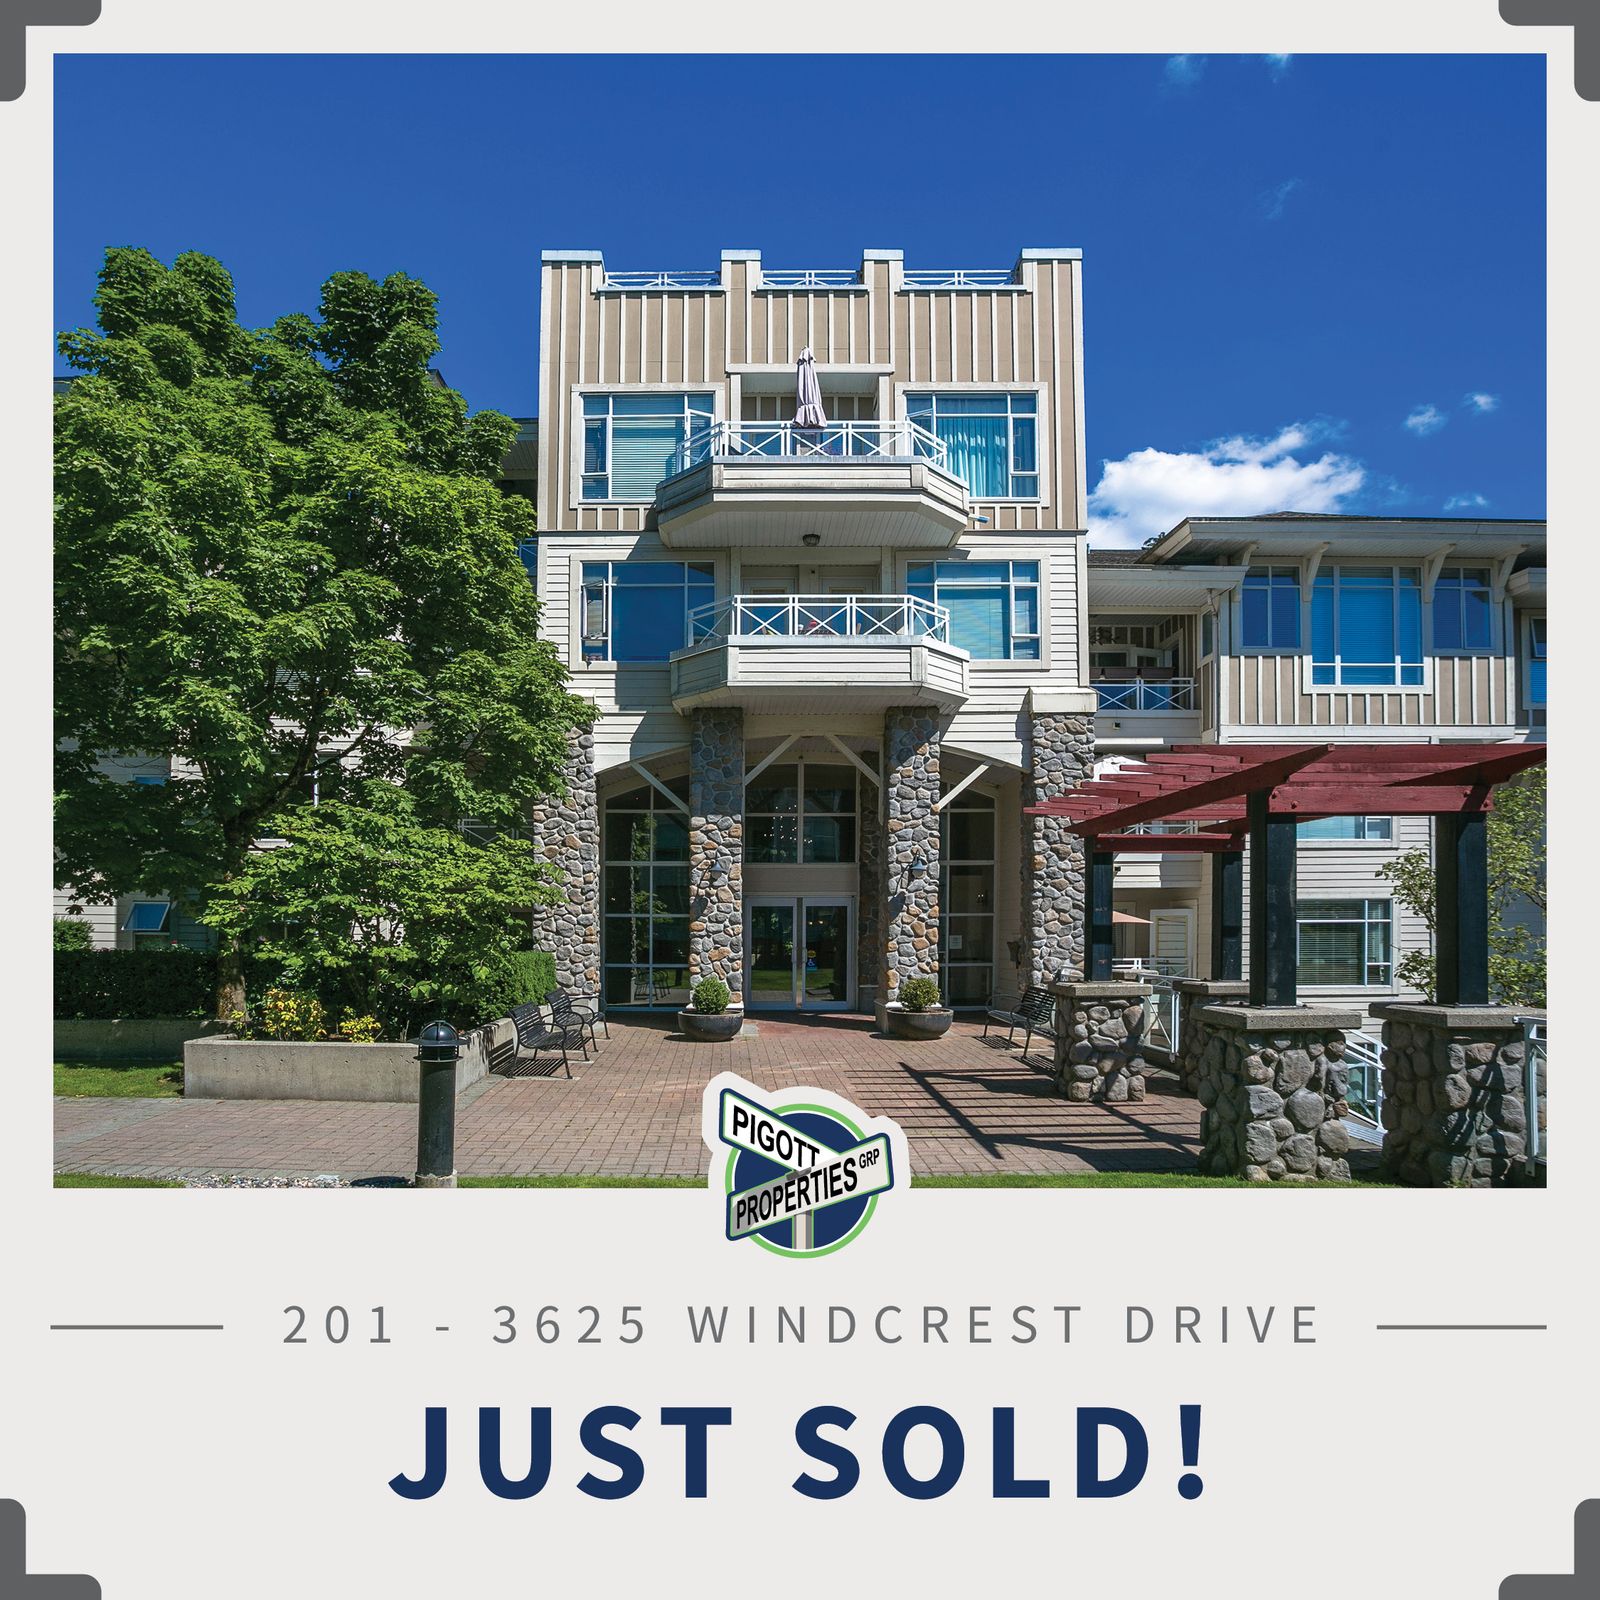 JUST SOLD! 